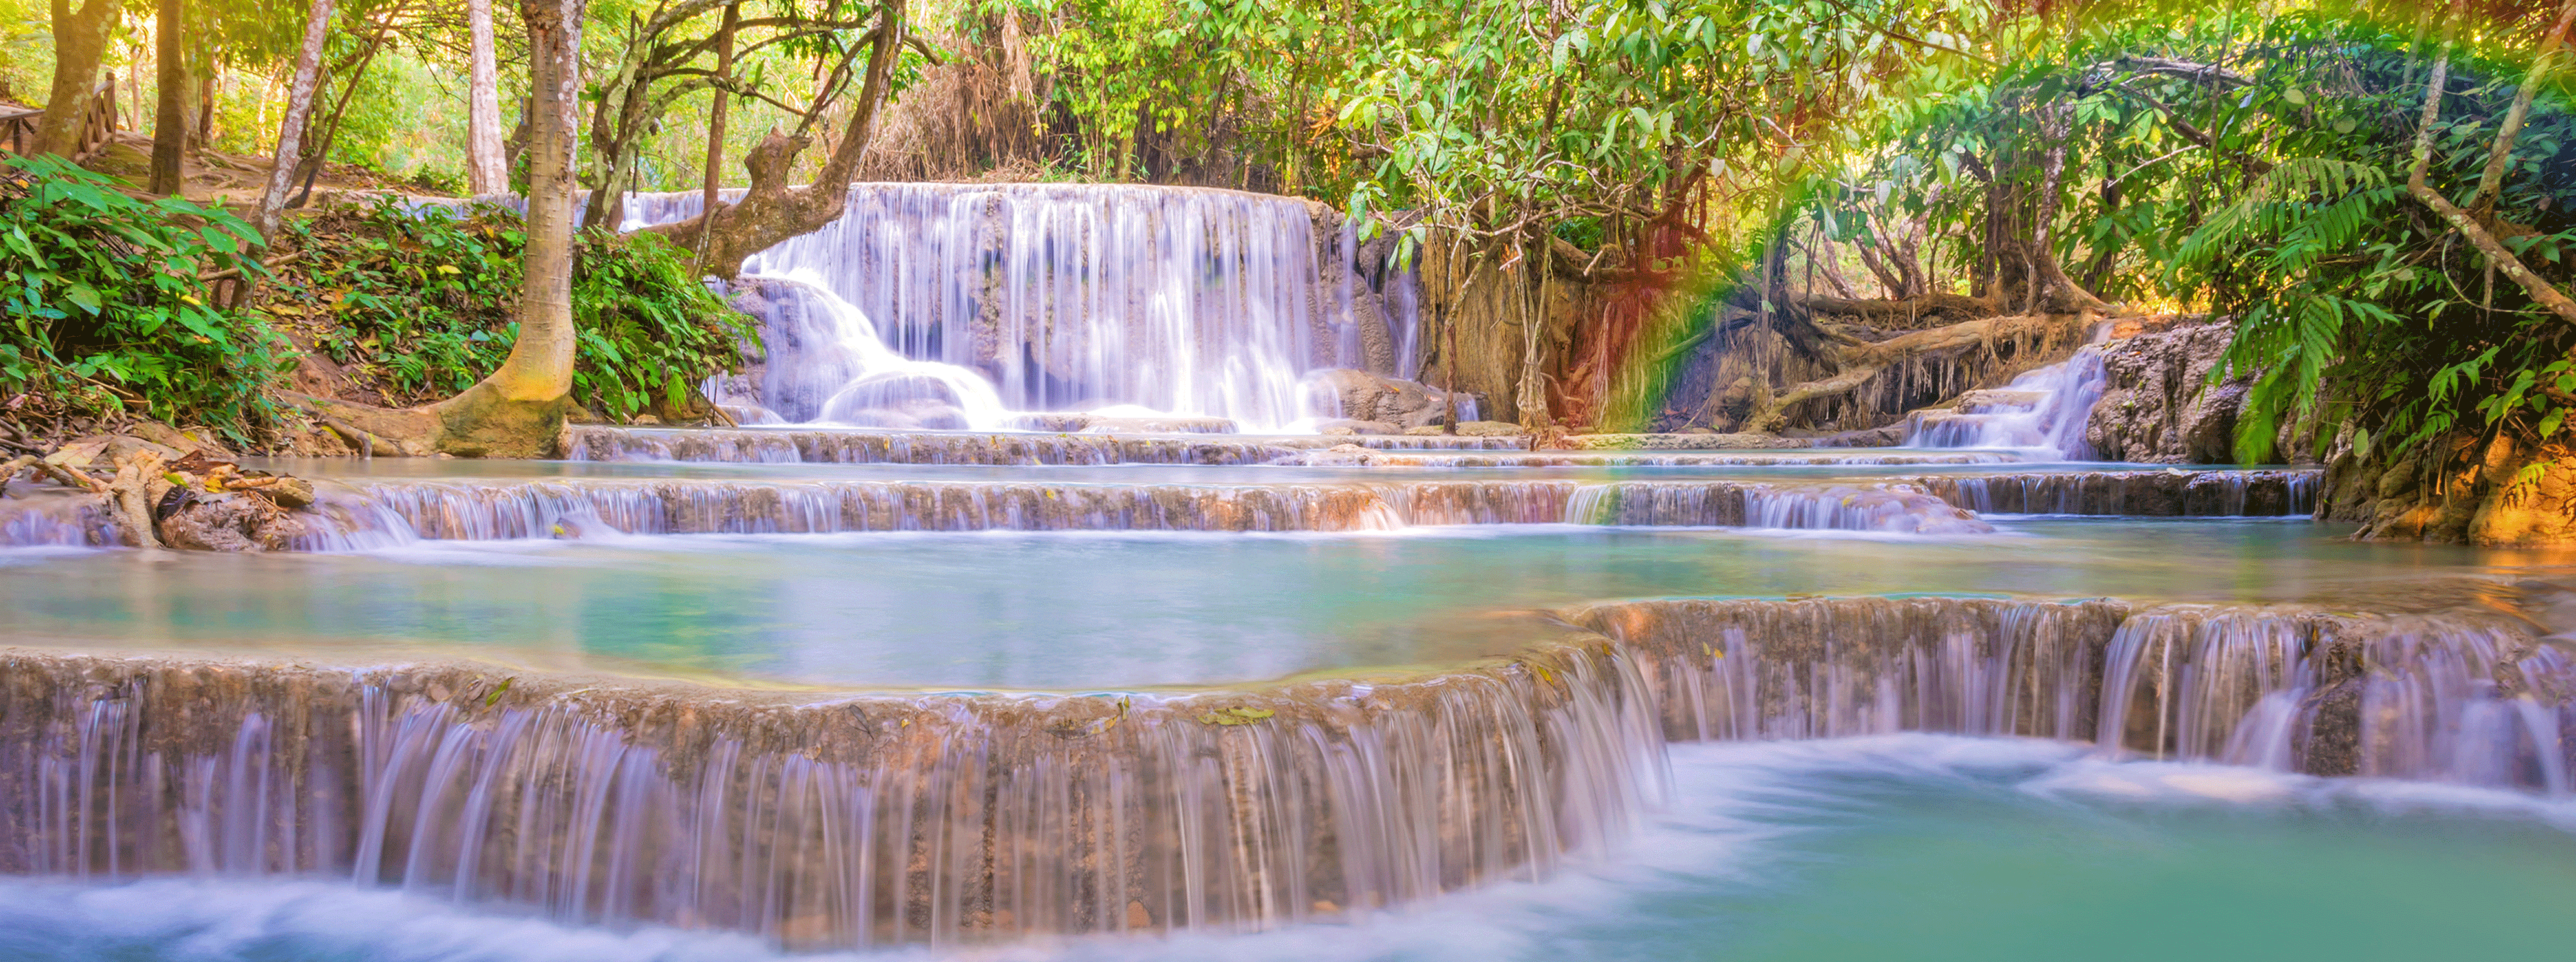 /resource/Images/Indochina/headerimage/Kuang-Si-waterfall-in-Laos.png